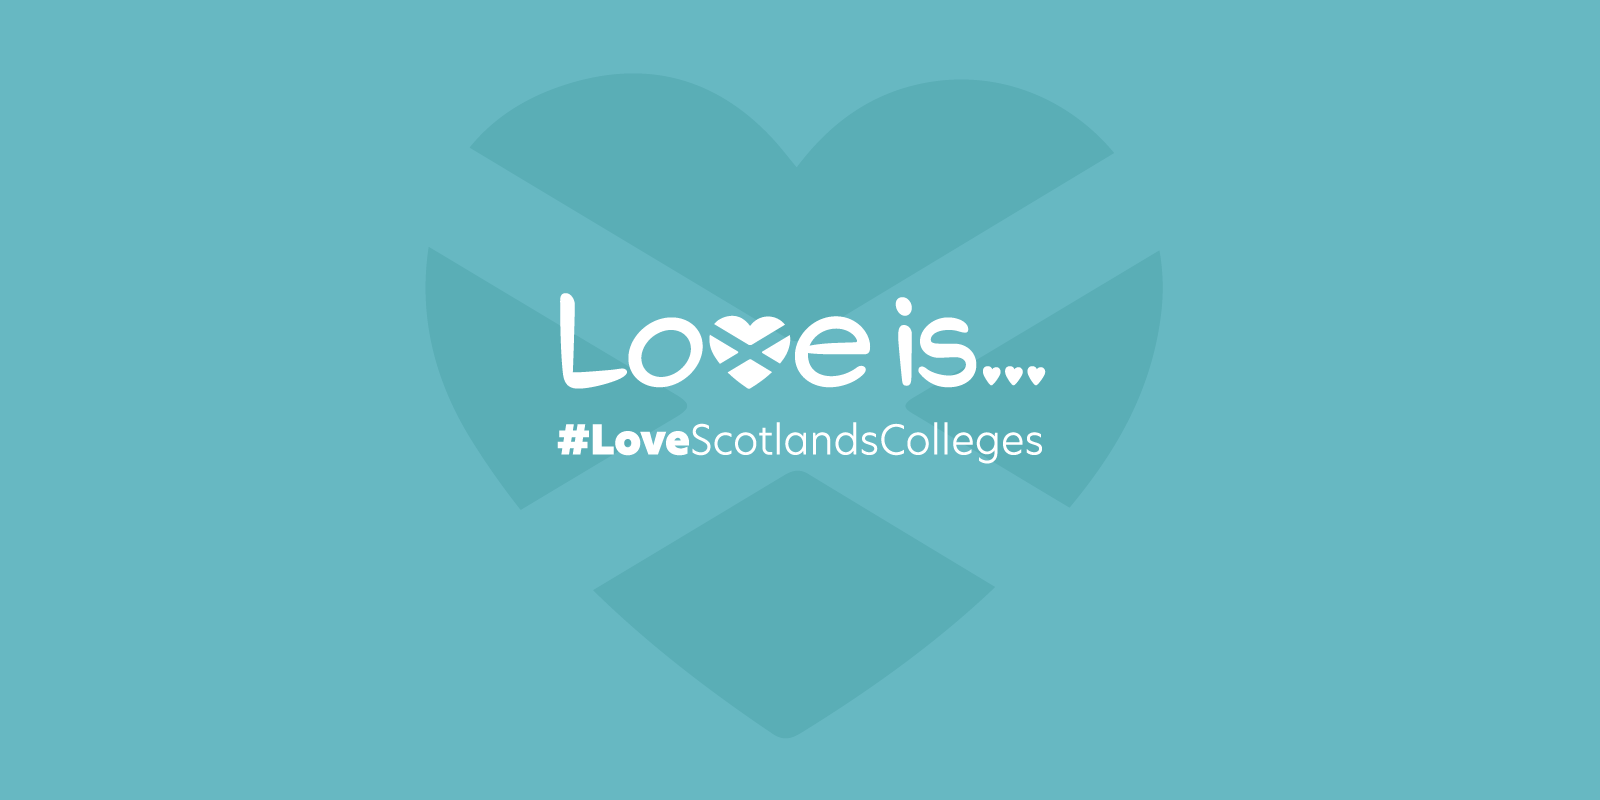 National launch of the #LoveScotlandsColleges campaign